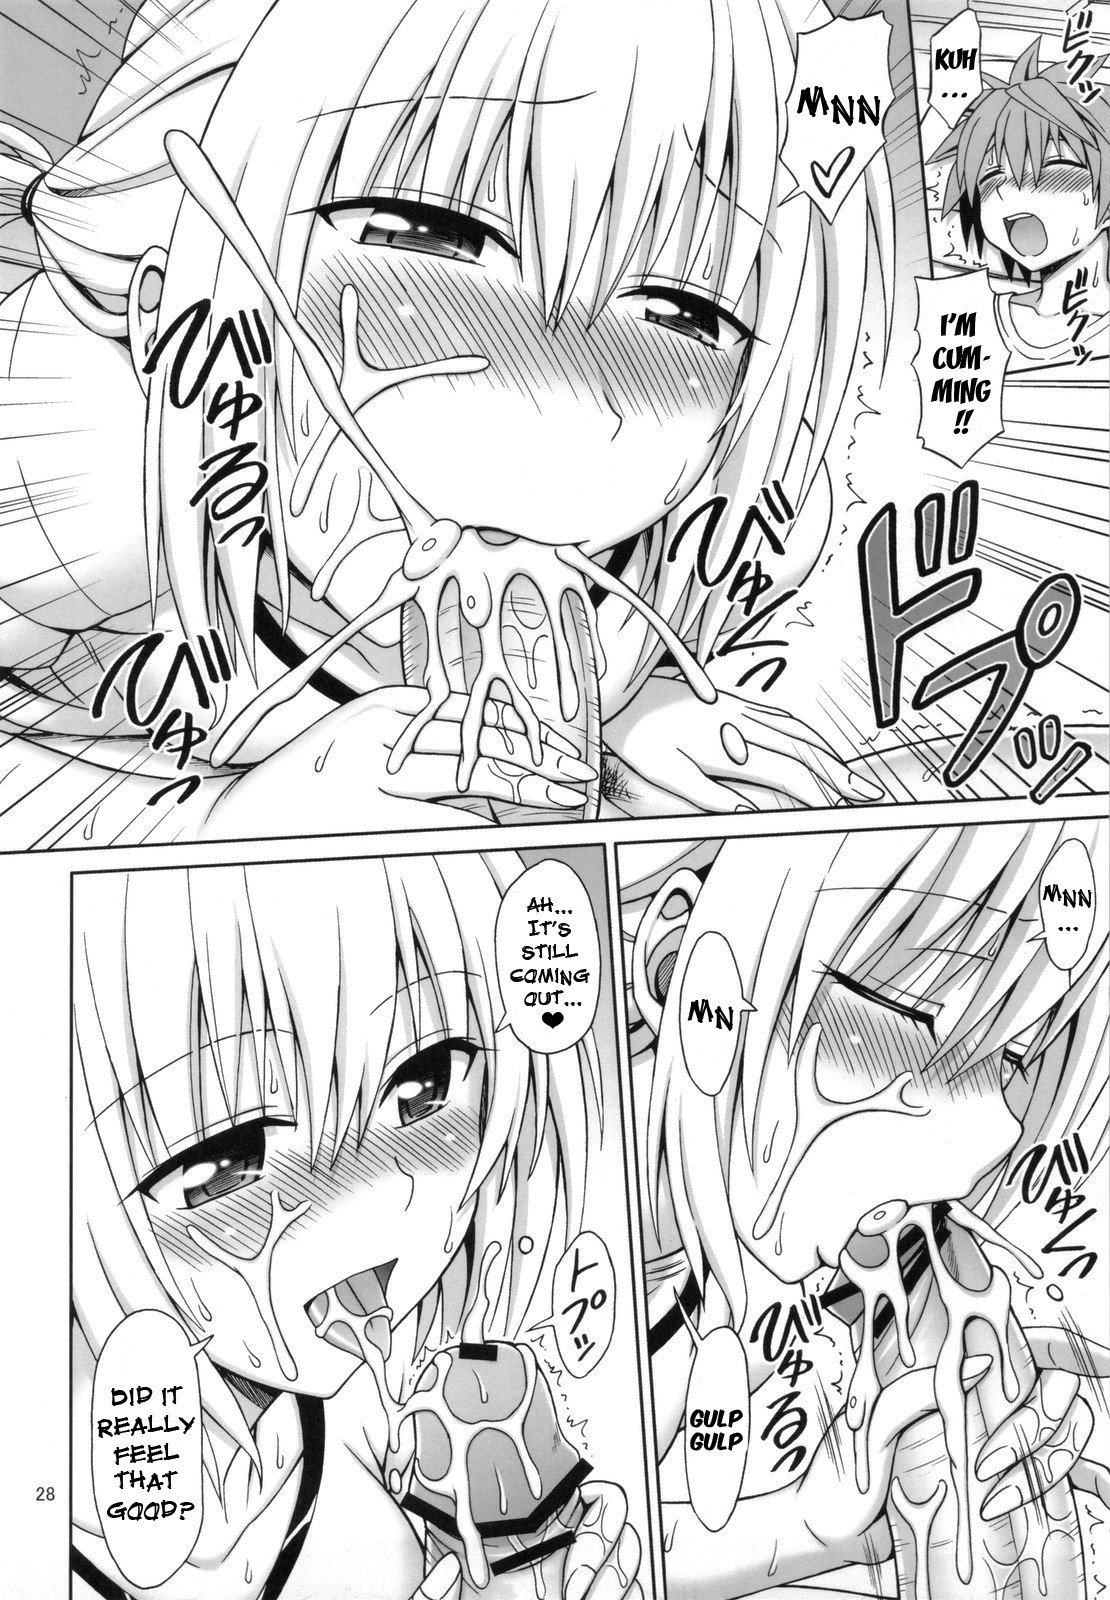 After-School Trouble hentai manga picture 27